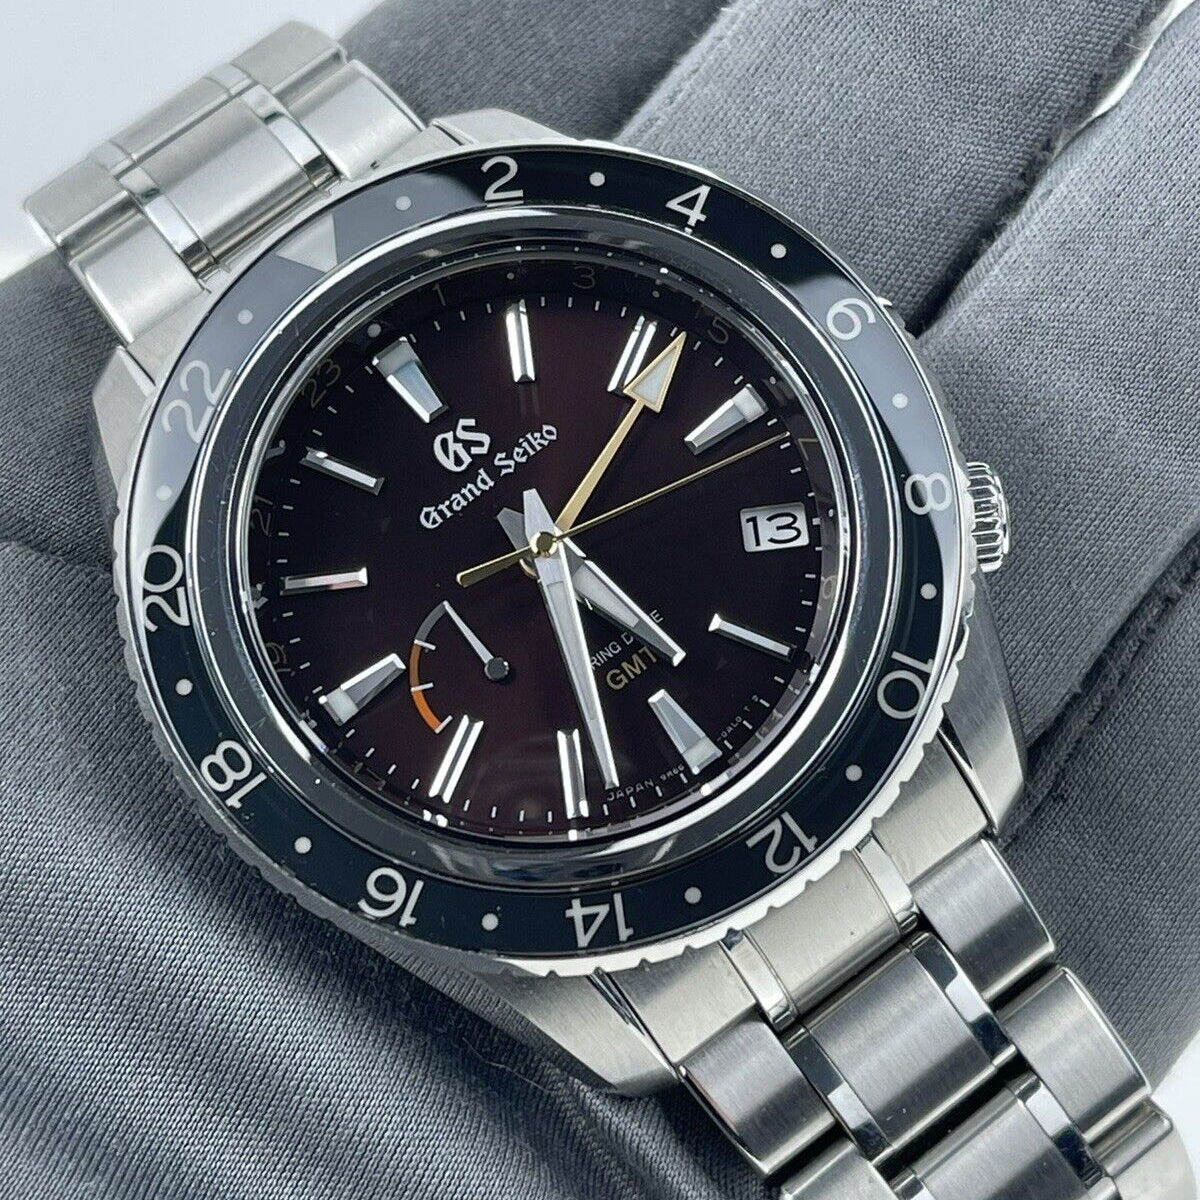 2019 Grand Seiko Spring Drive GMT - Limited to 600 Pieces SBGE245 | Bezel